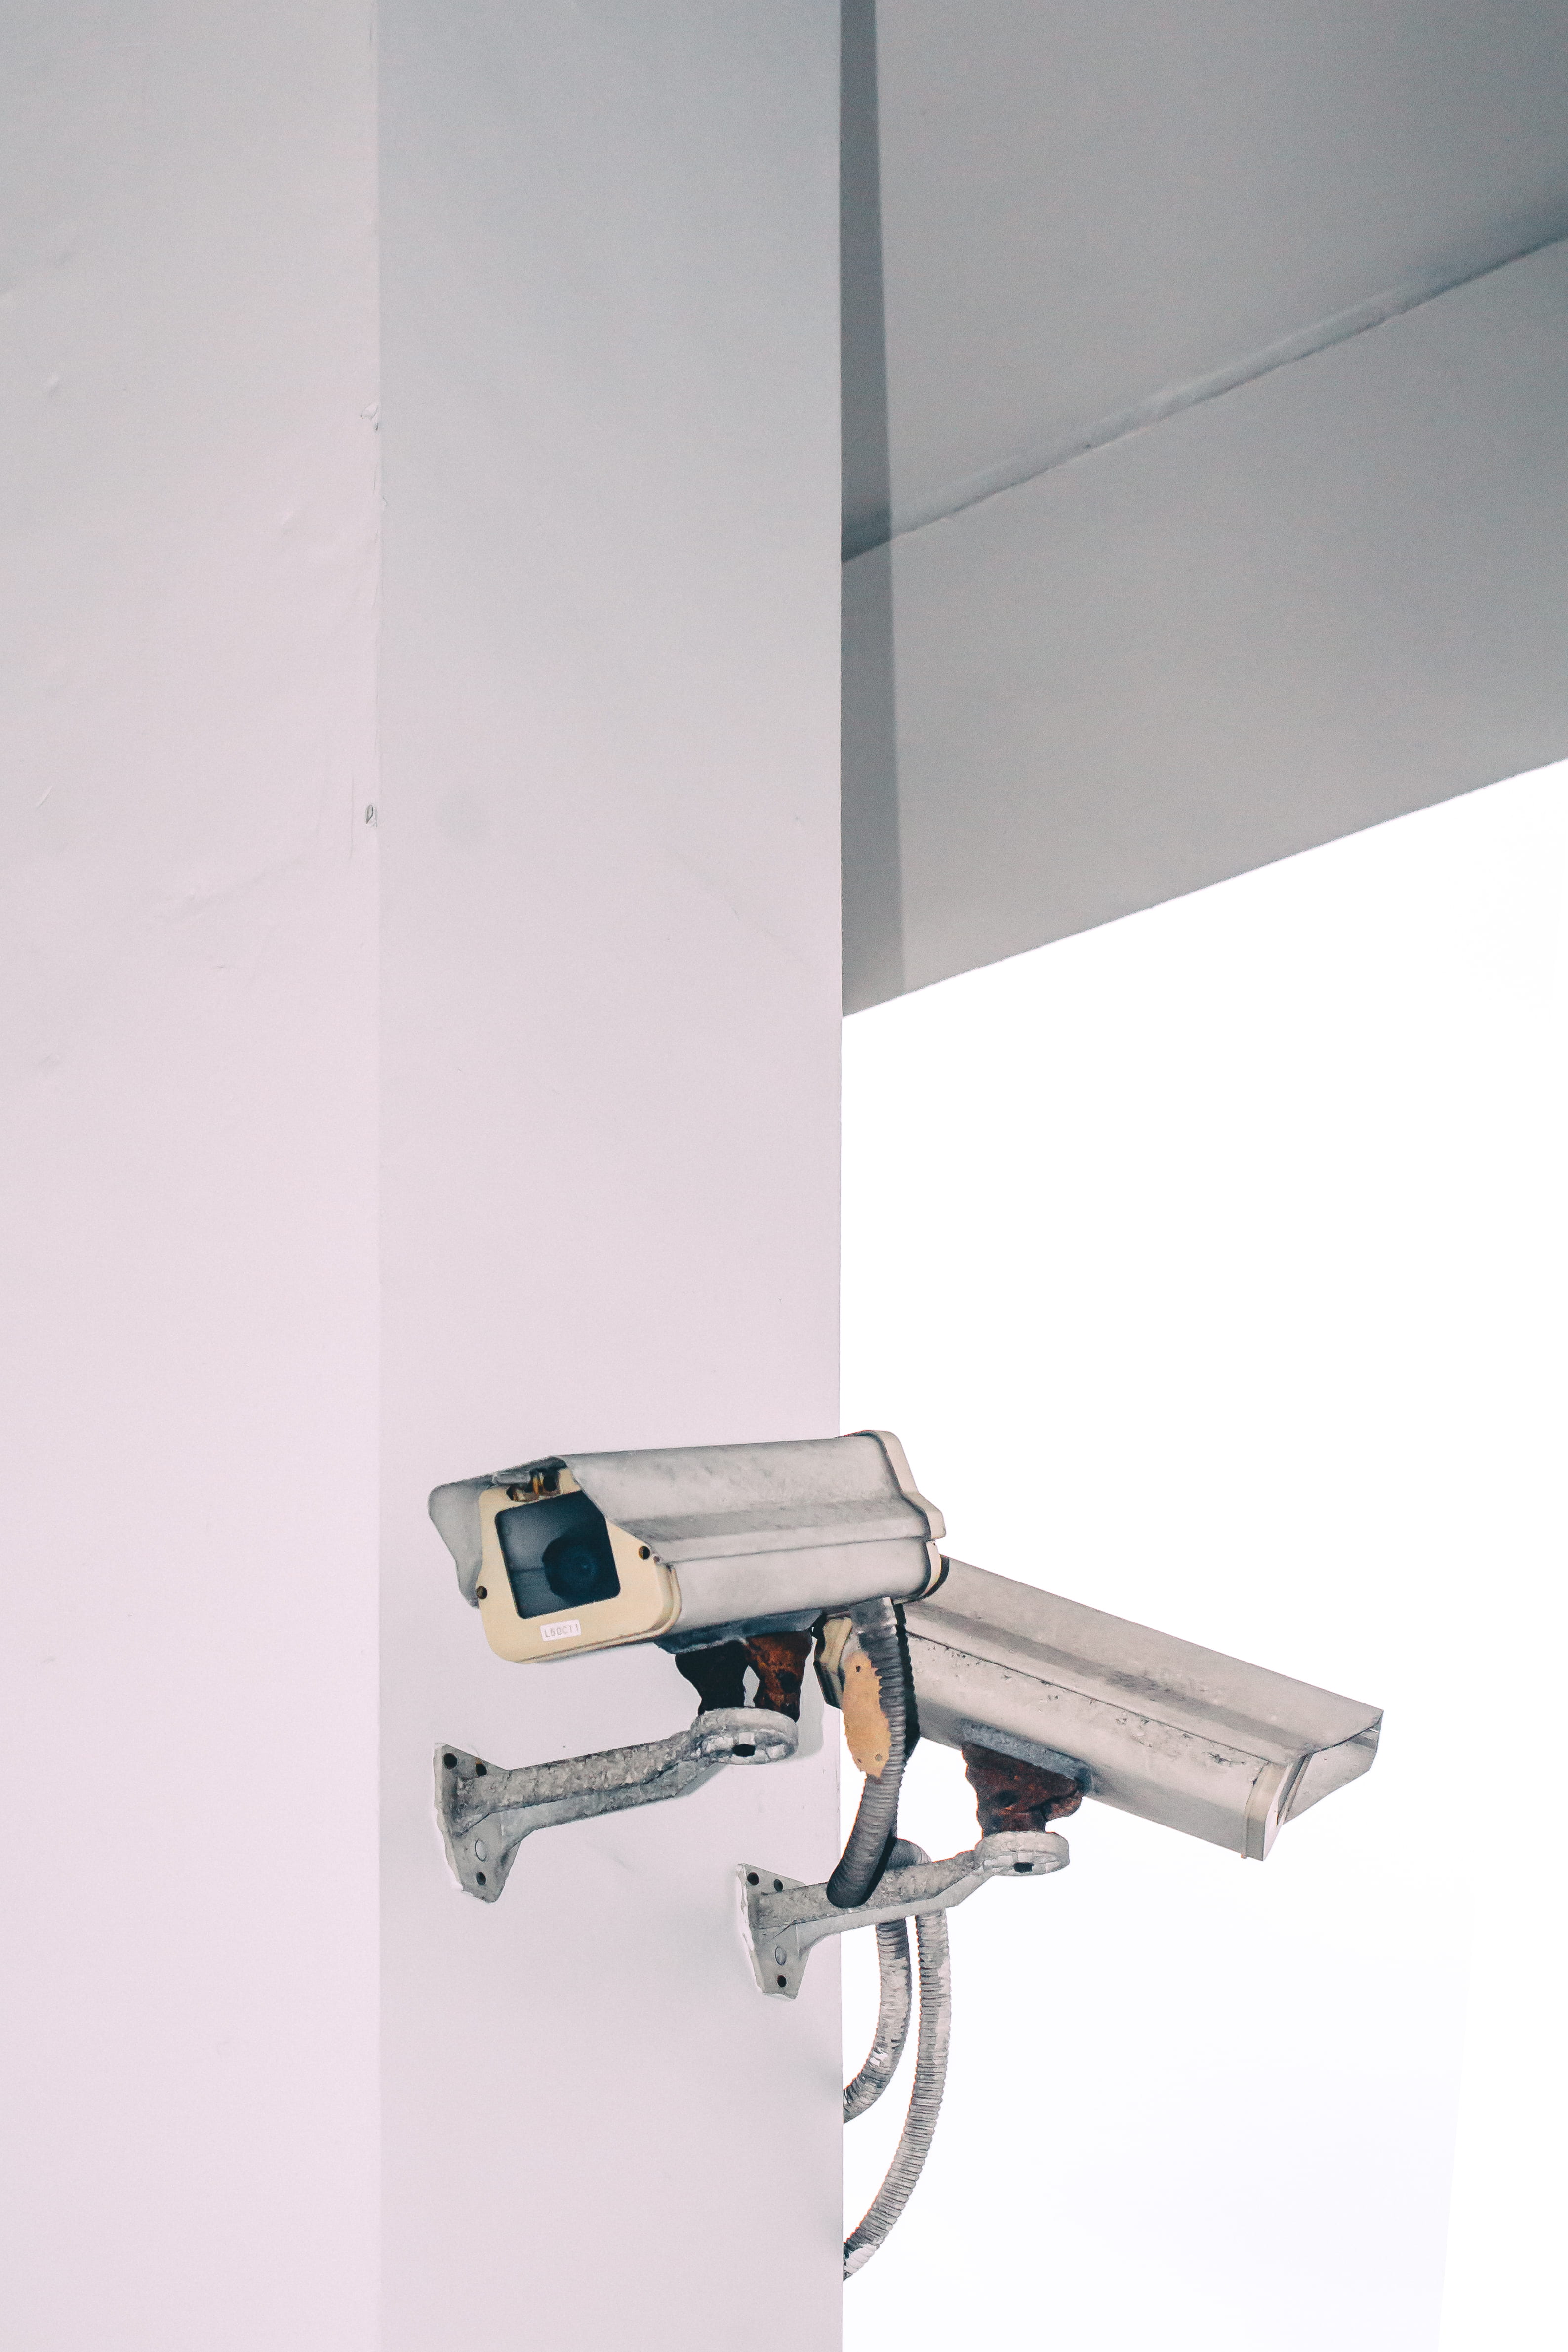 two bullet security camera attached on wall, white CCTV camera on wall